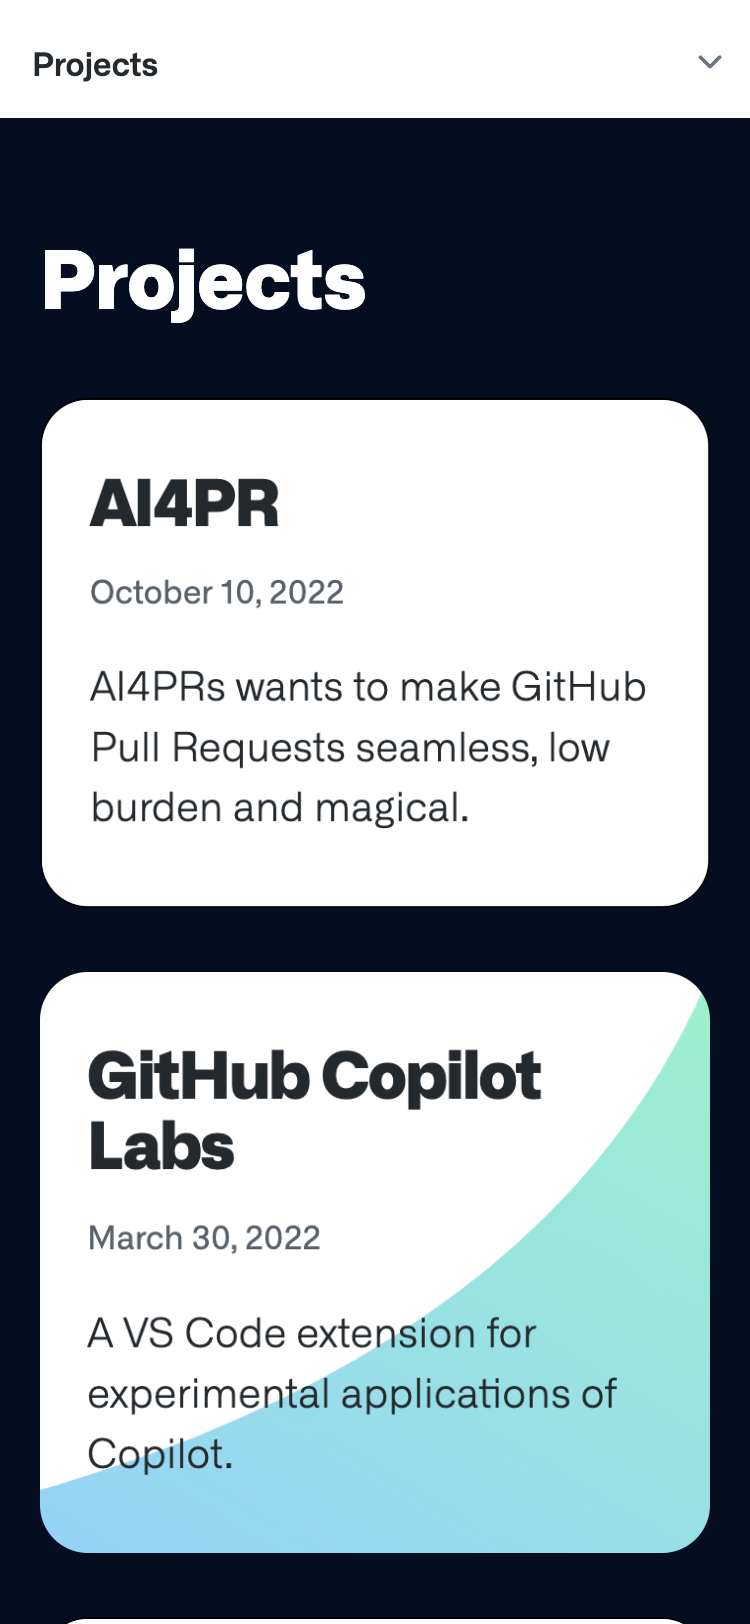 Screenshot of the Projects section of the GitHub Next homepage on a mobile device showing two cards, each containing information about a project.